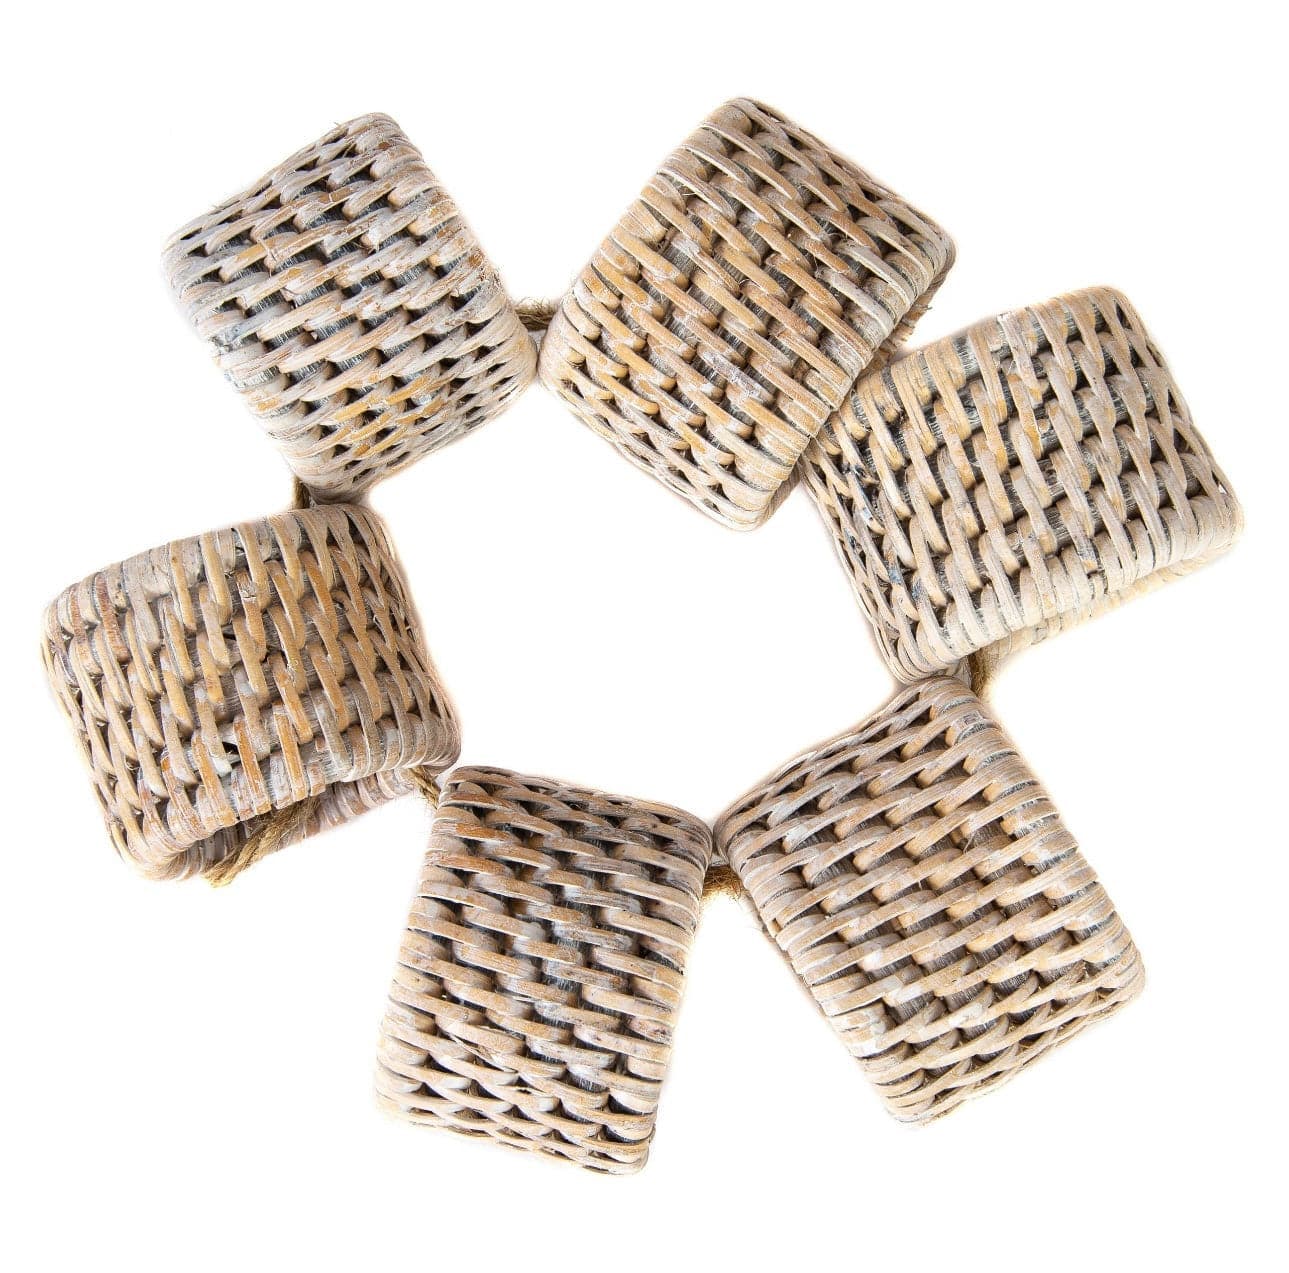 The Carpentry Shop Co. White Wash Rattan Oval Napkin Rings